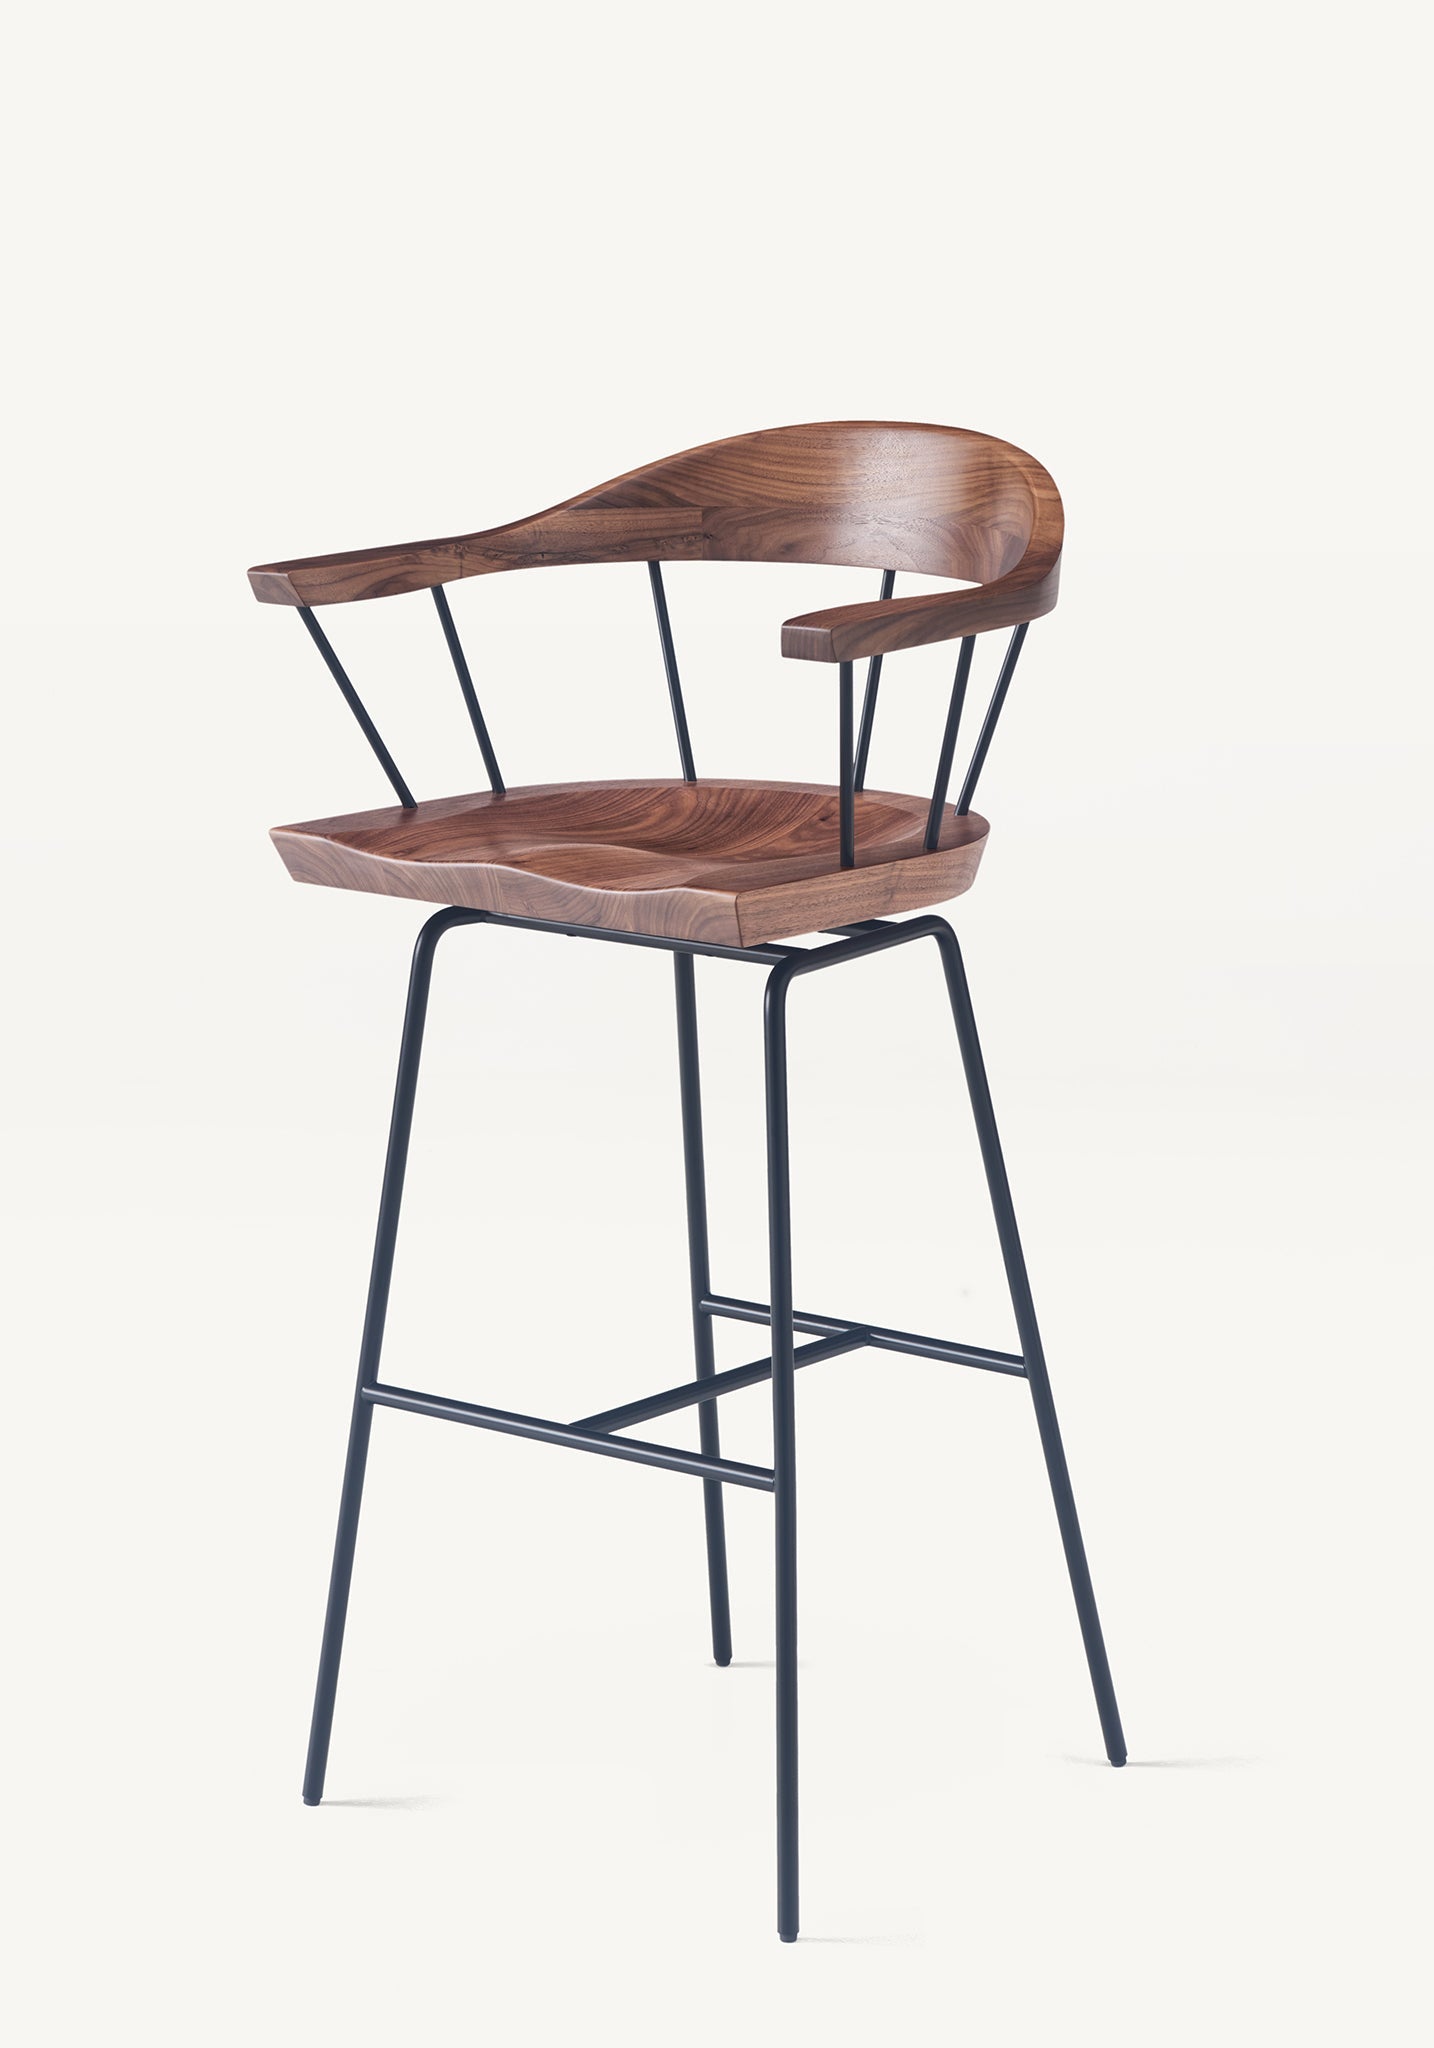 Spindle Stool